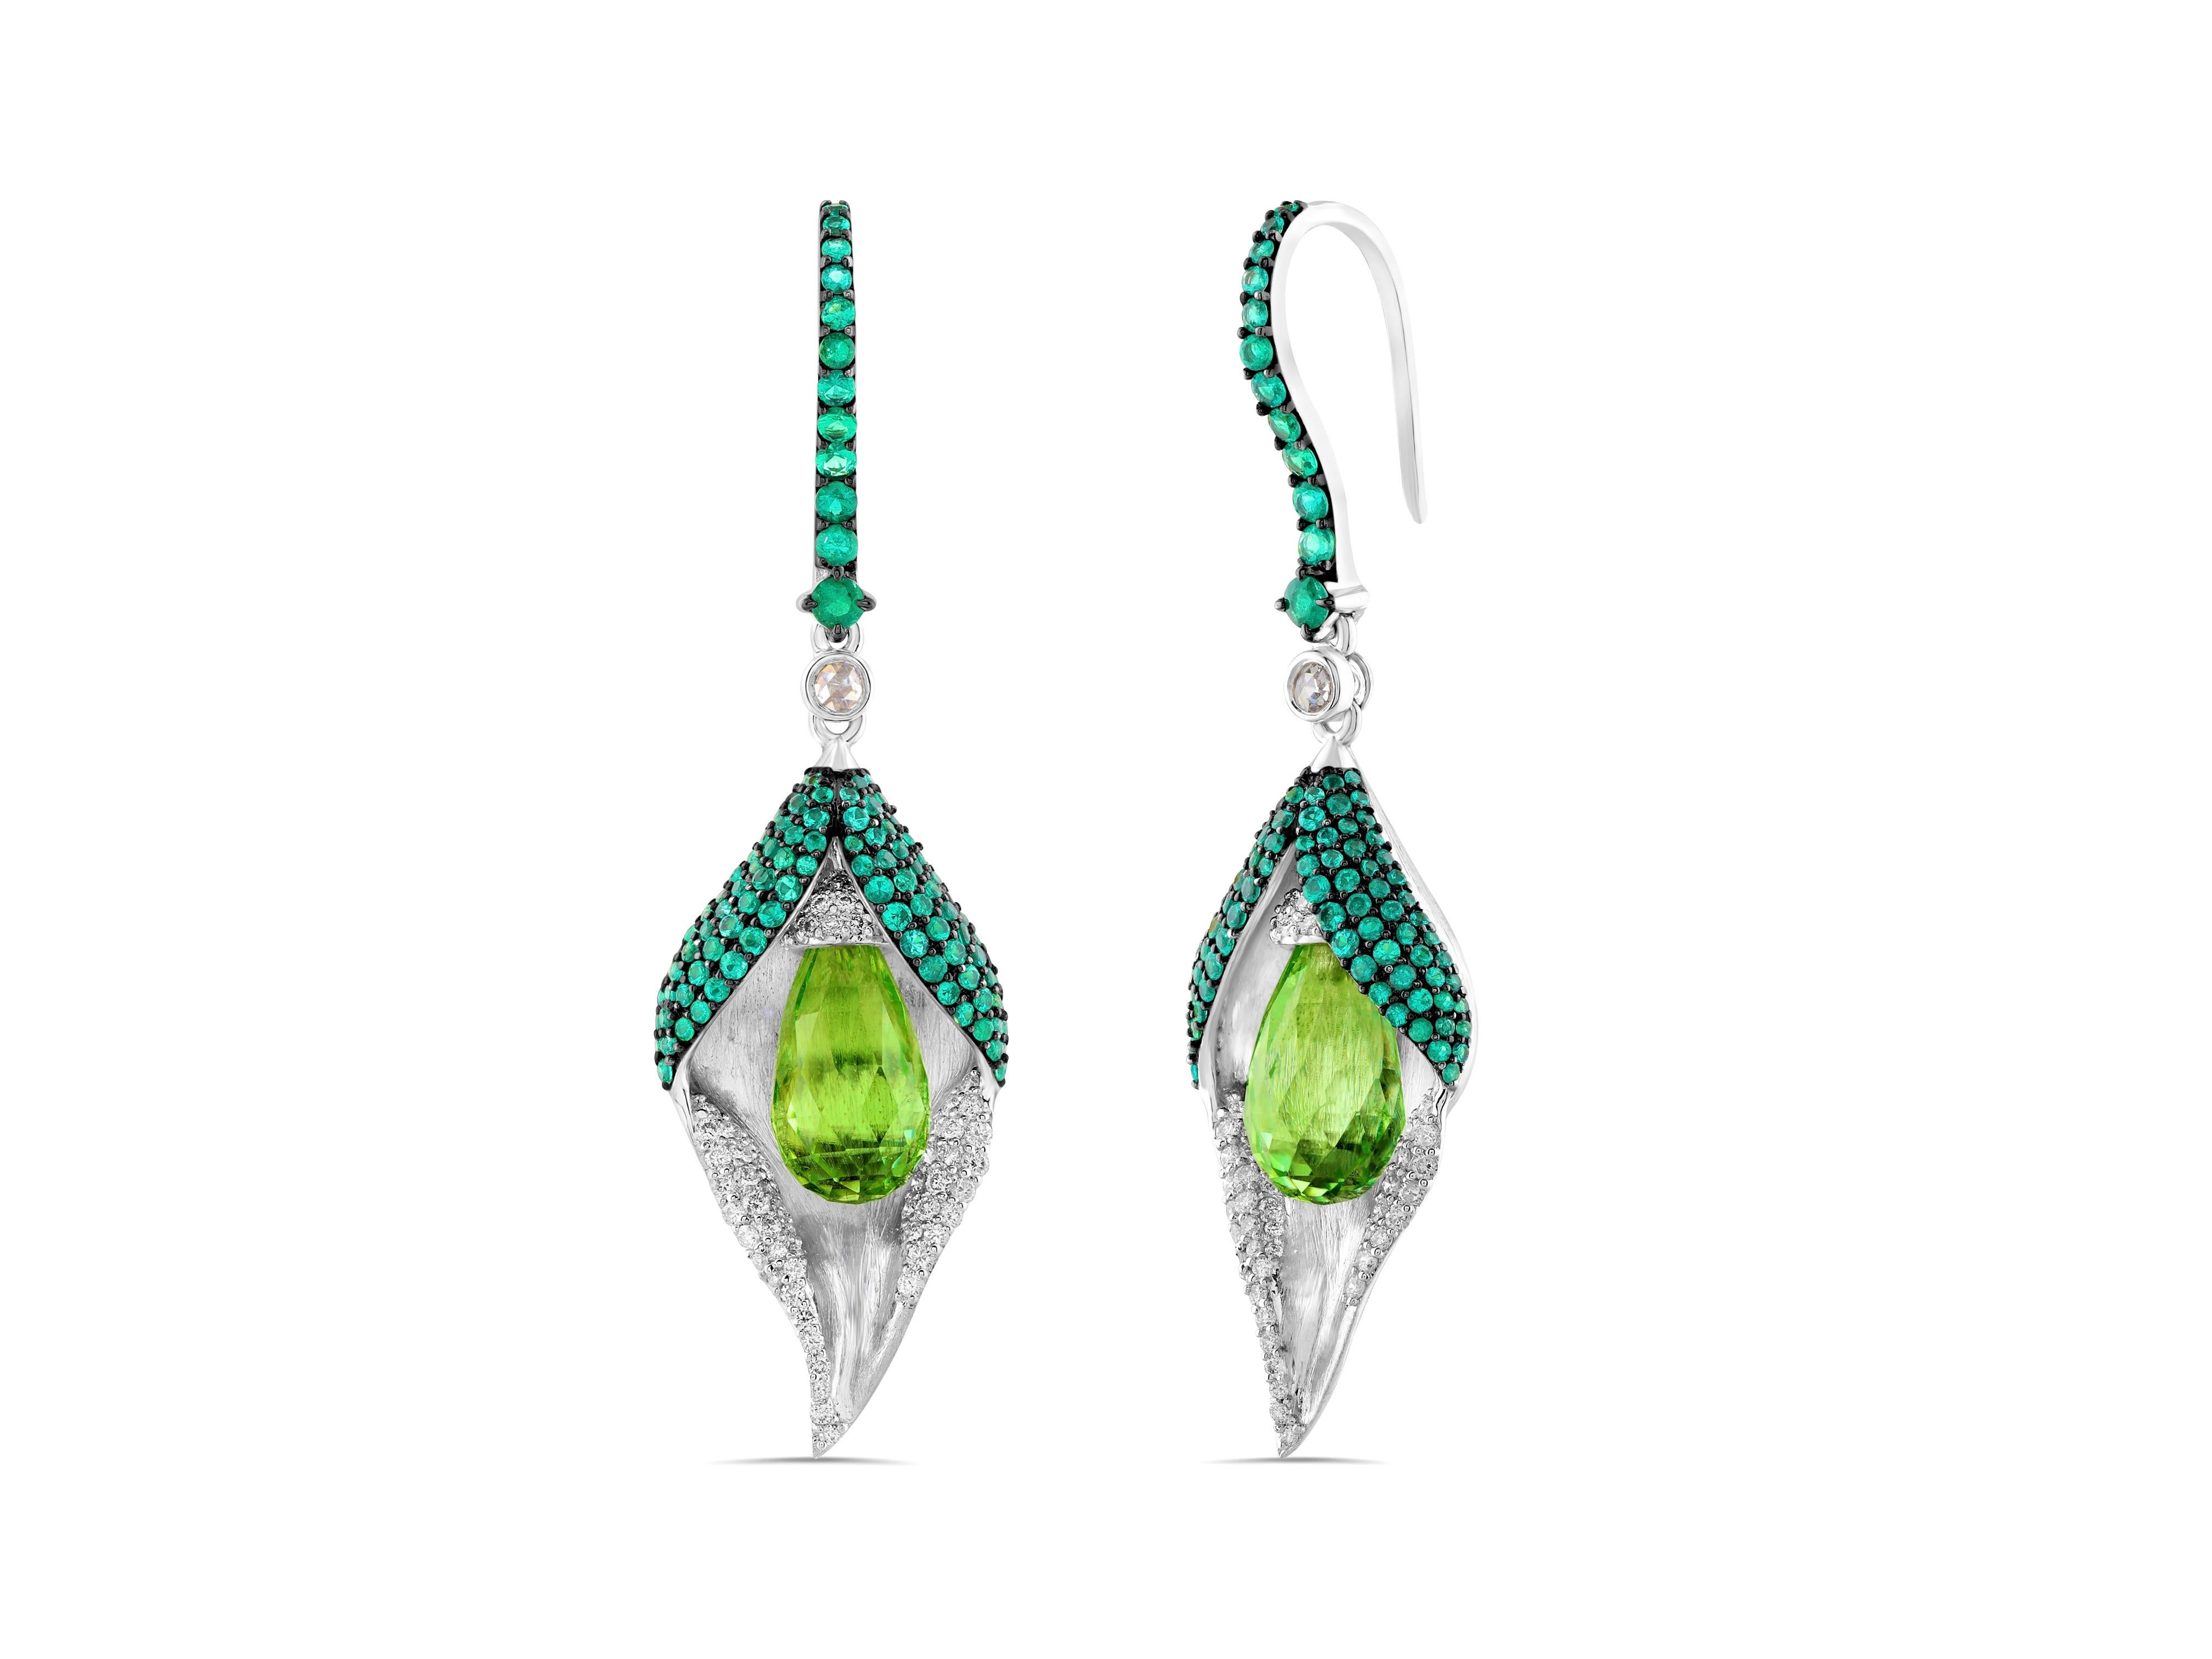 Inspired by a leaf and bud, these gorgeous diamond earrings in 18 karat white gold with emeralds and peridot drops really do take a leaf out of nature's book.

The stunning vibrance of the peridot is beautifully complemented by brilliant-cut